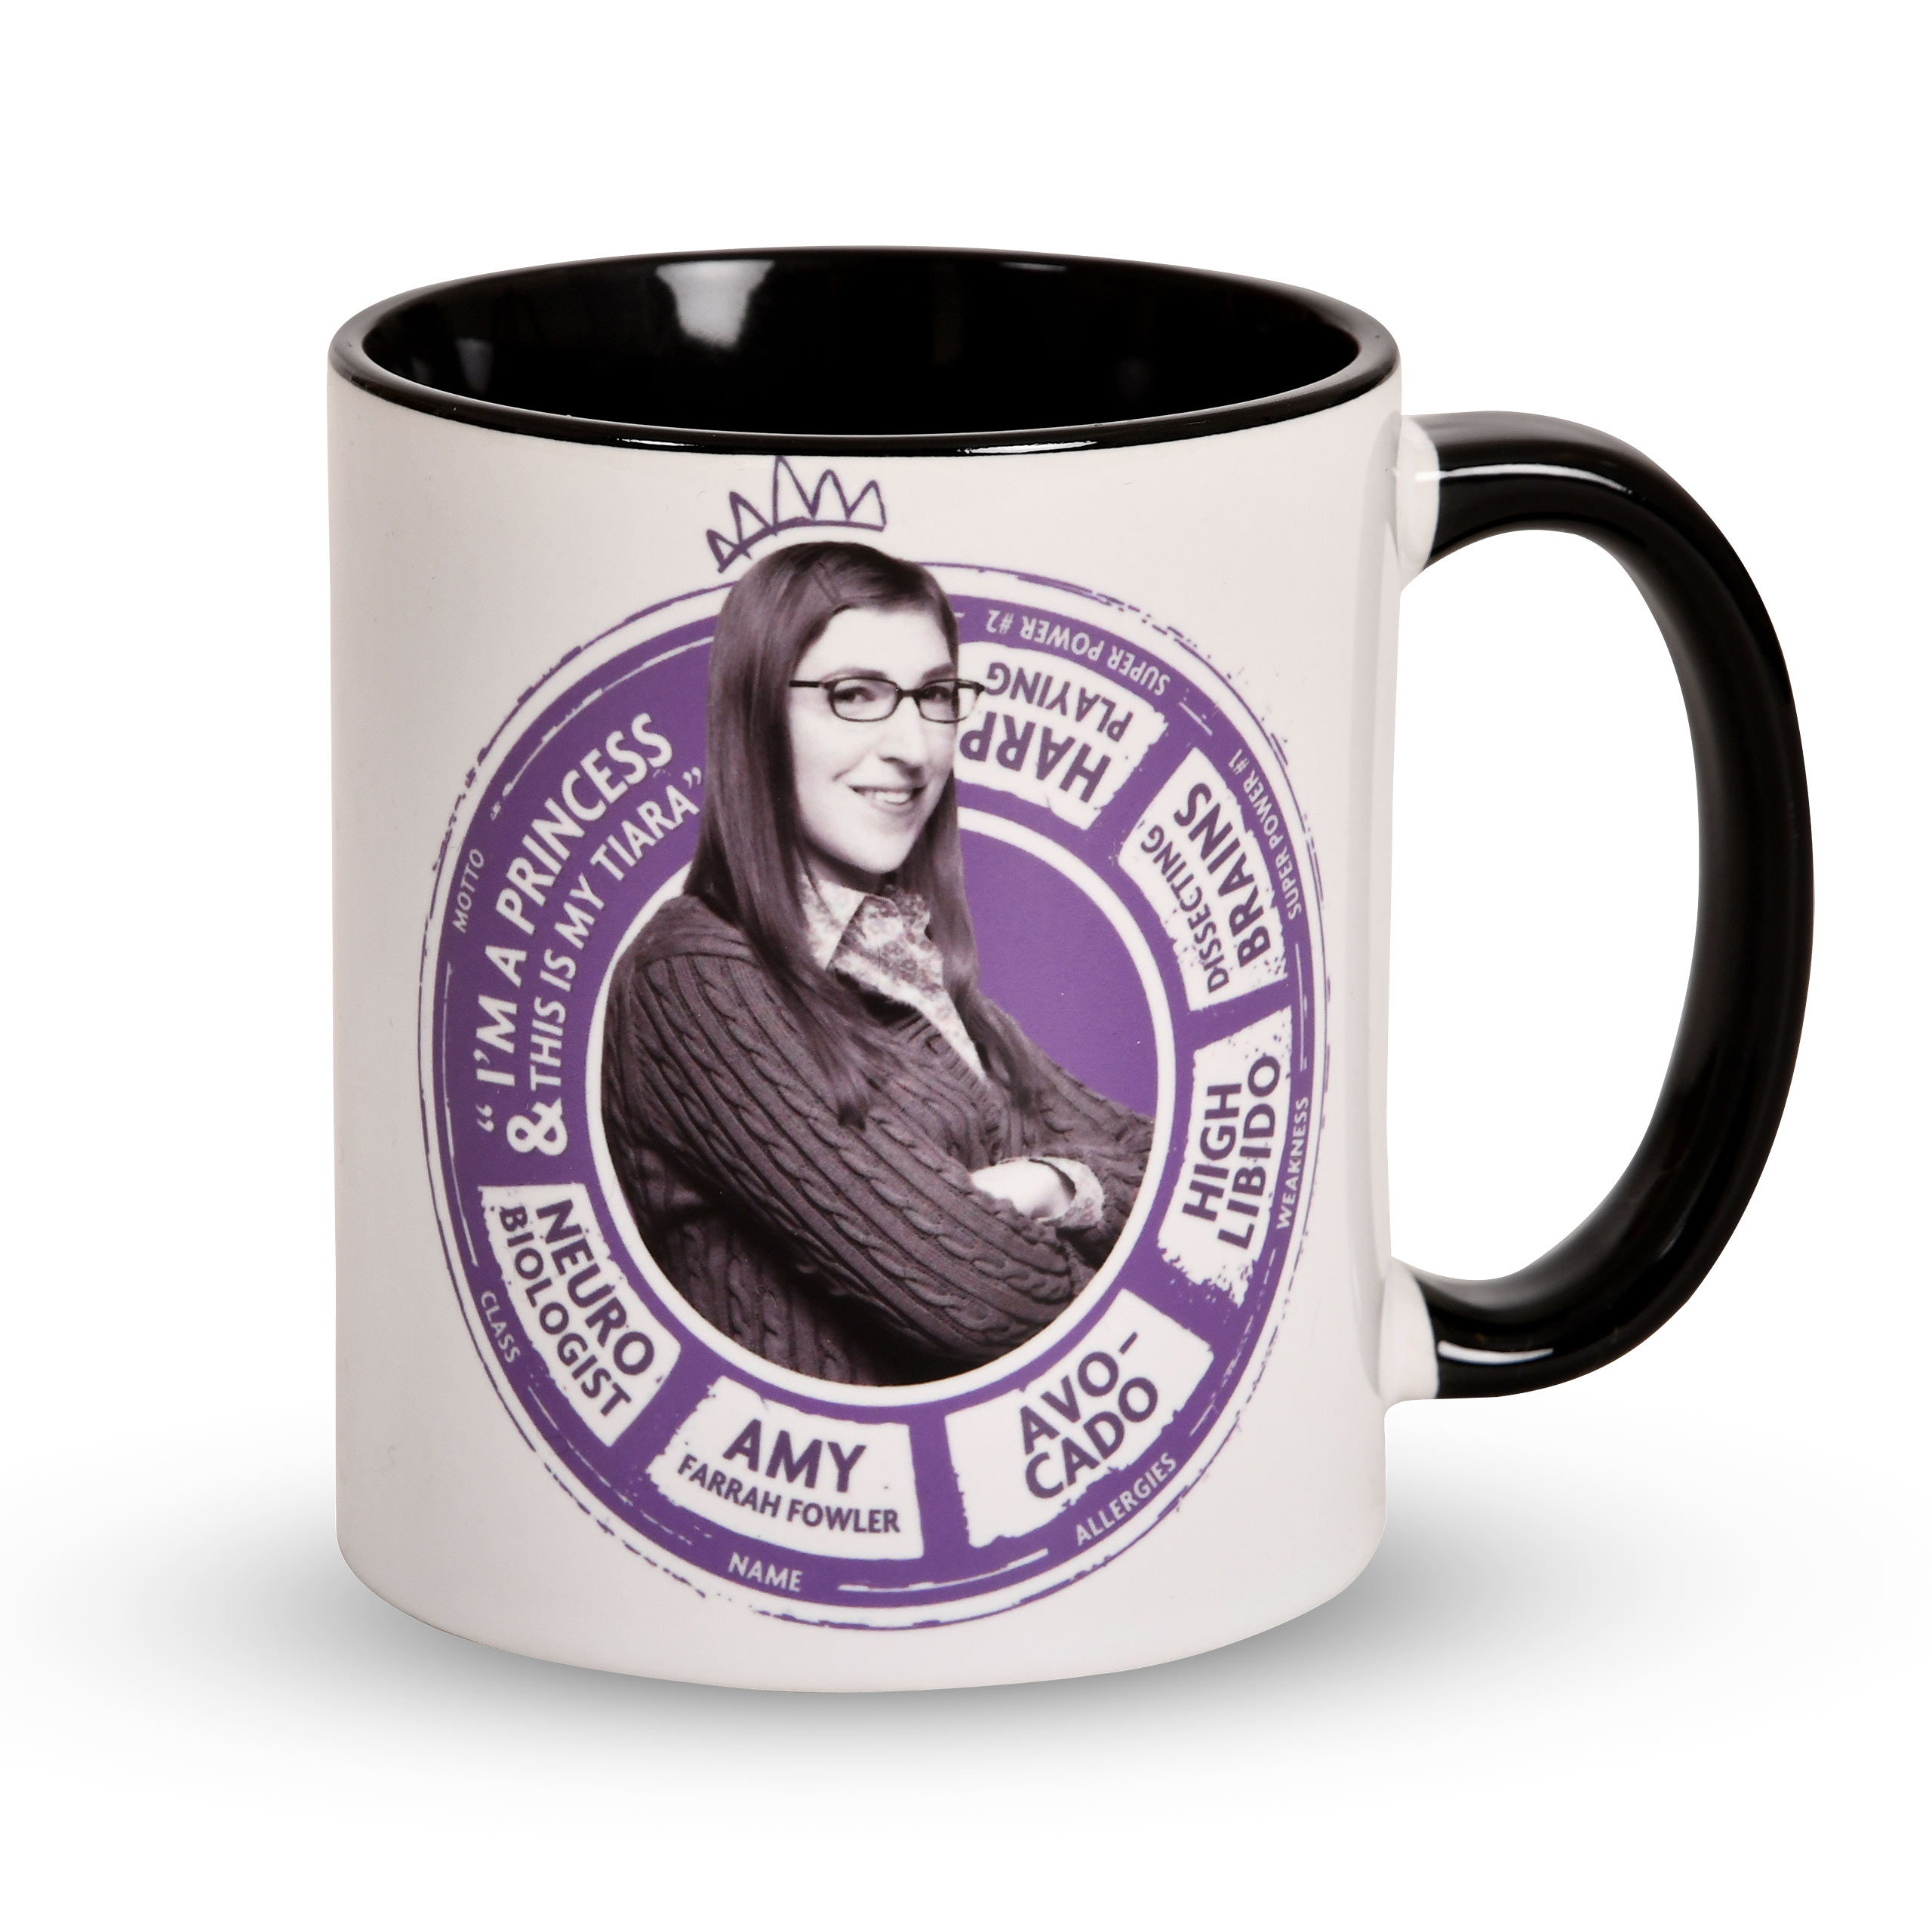 Tasse de personnage Amy - The Big Bang Theory